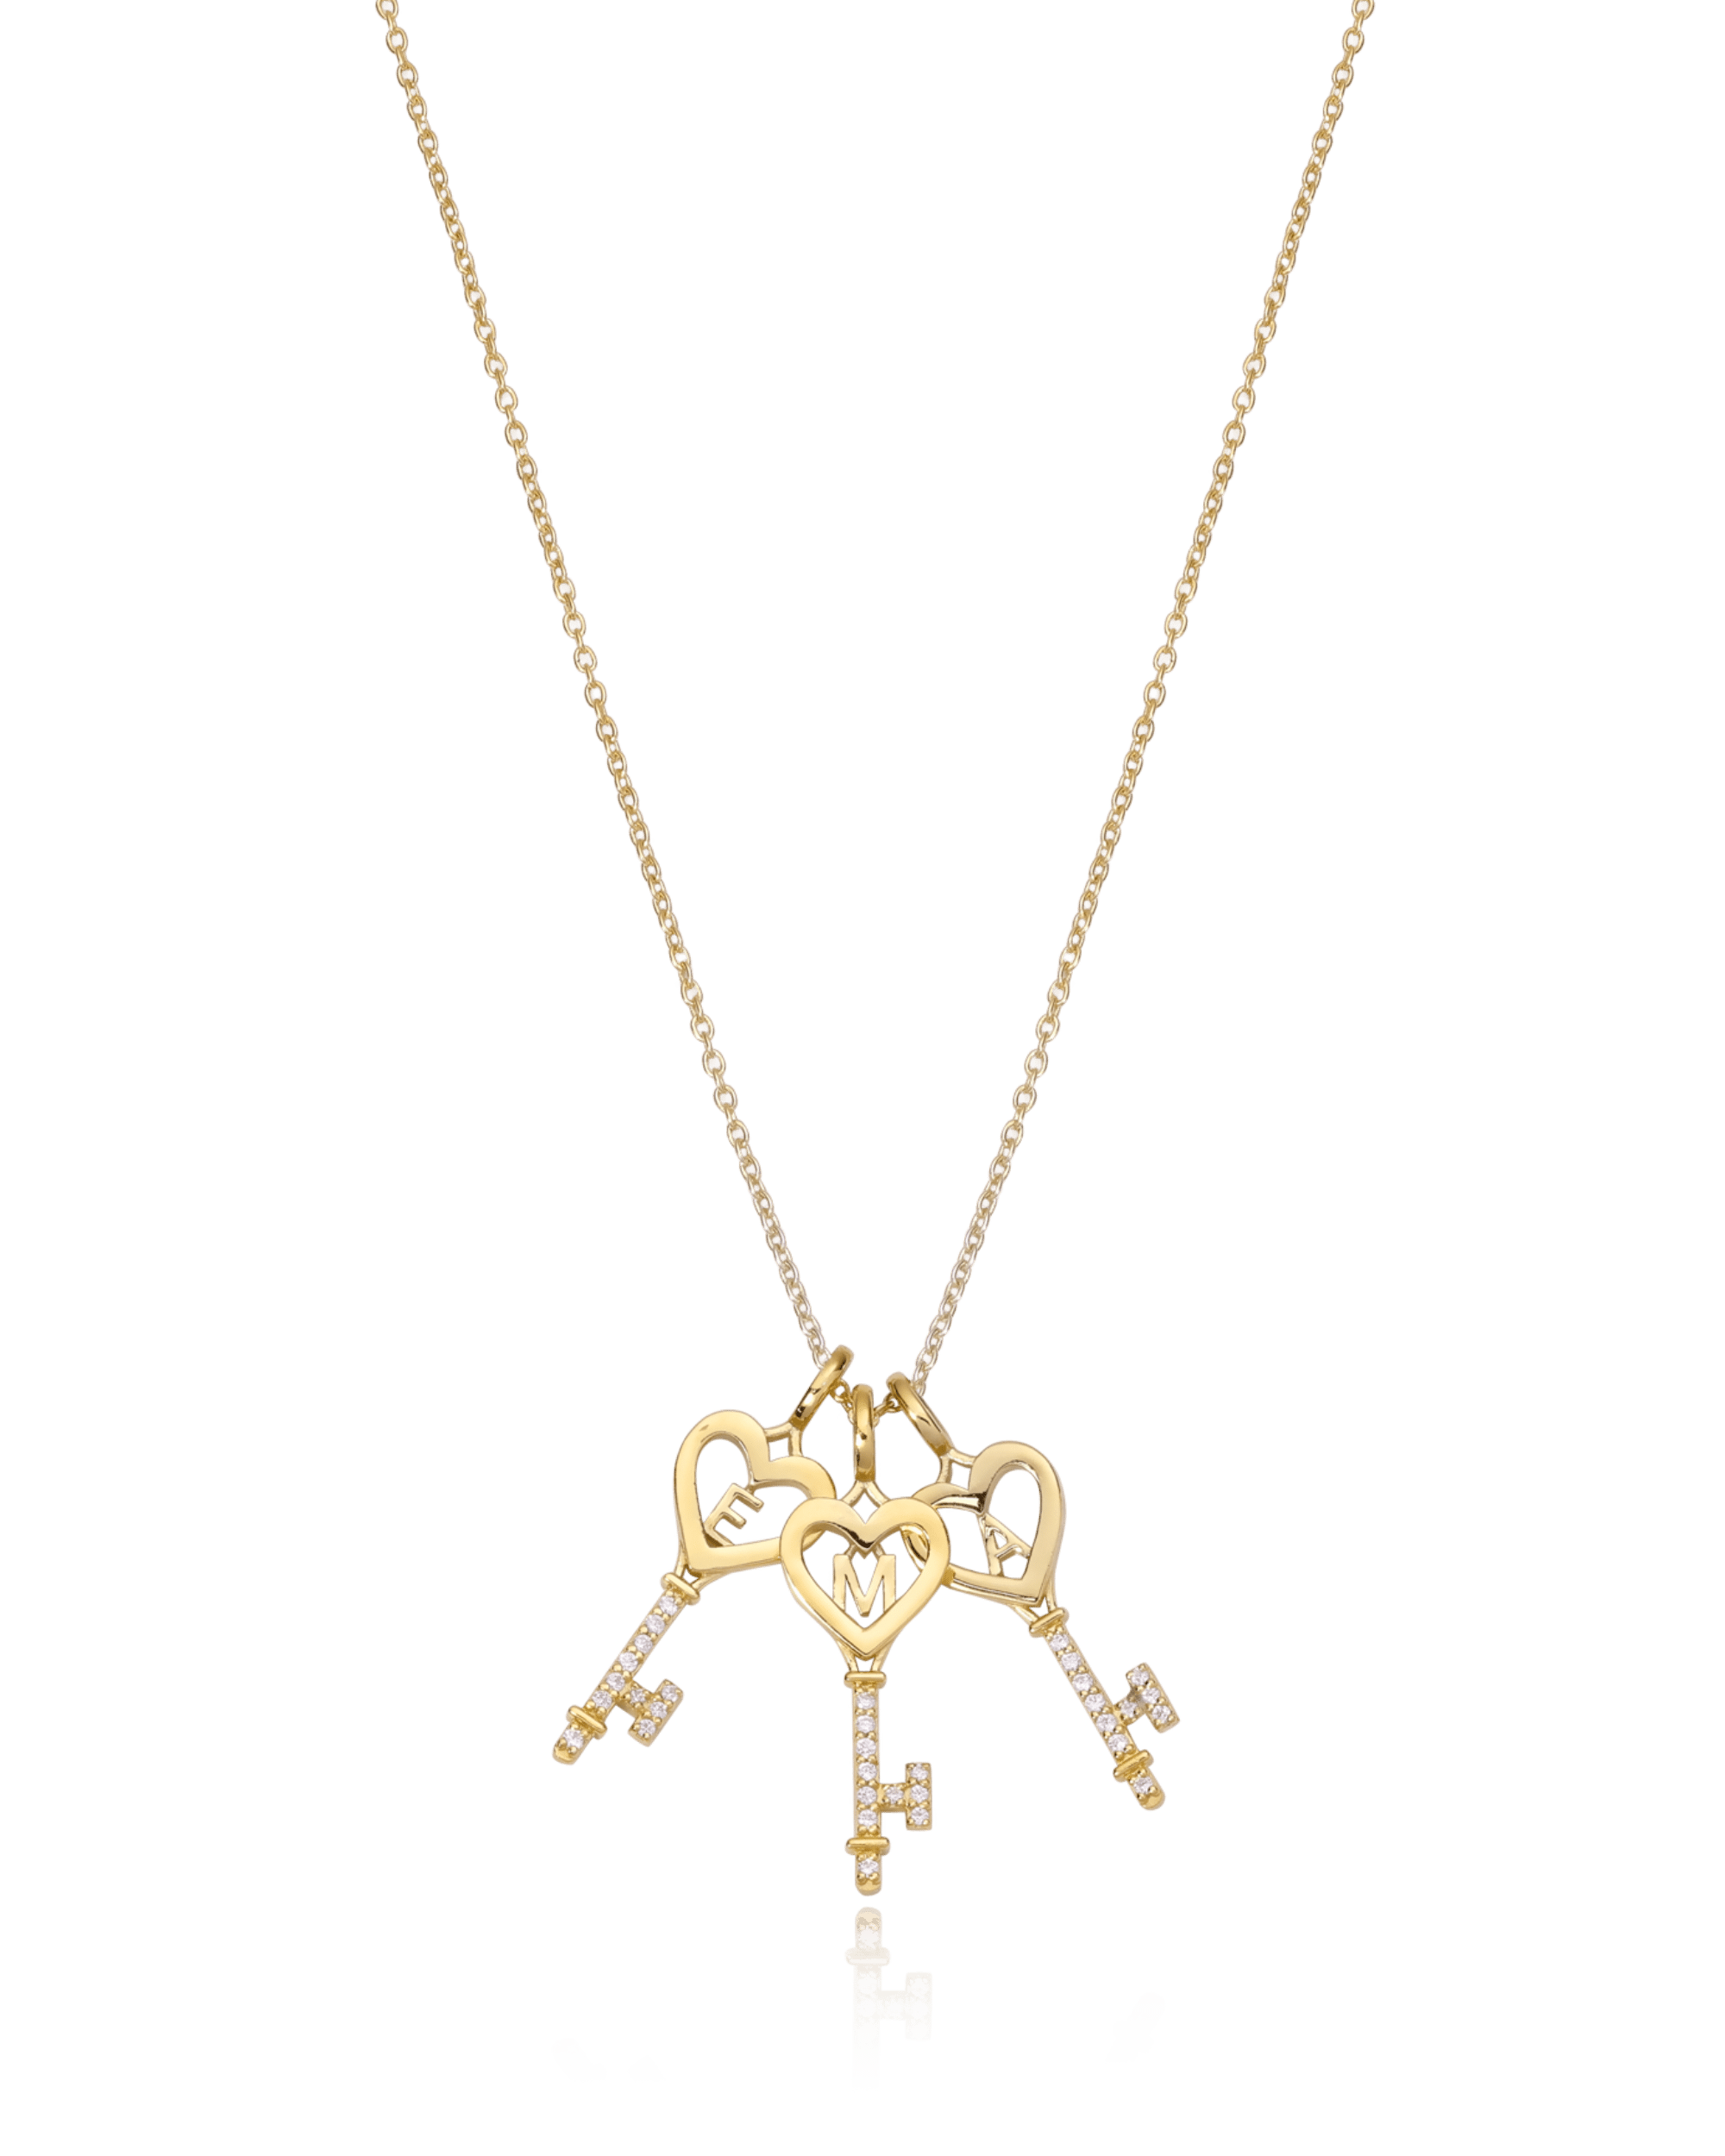 Key To My Heart Necklace with Diamond - 18K Gold Vermeil Necklaces magal-dev 1 Key 16" 